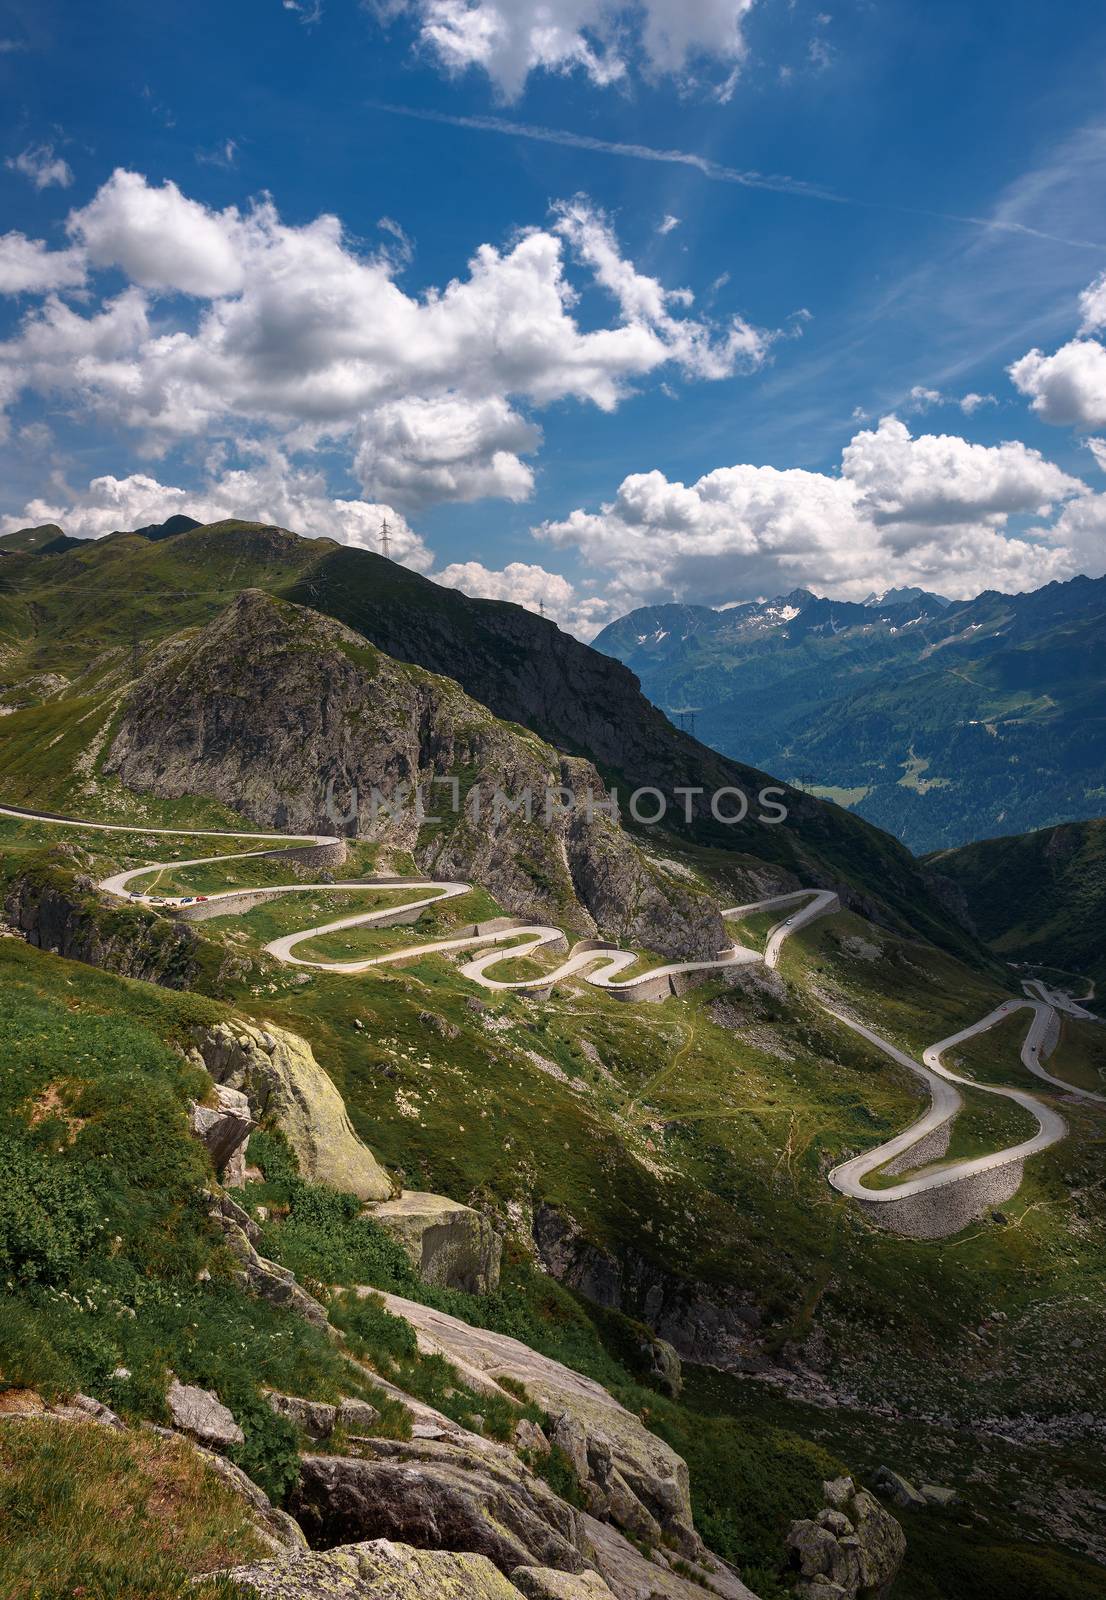 Aerial view of the old road with many serpentines going through the St. Gotthard pass in the Swiss Alps photographed from the Tremola Viewpoint.